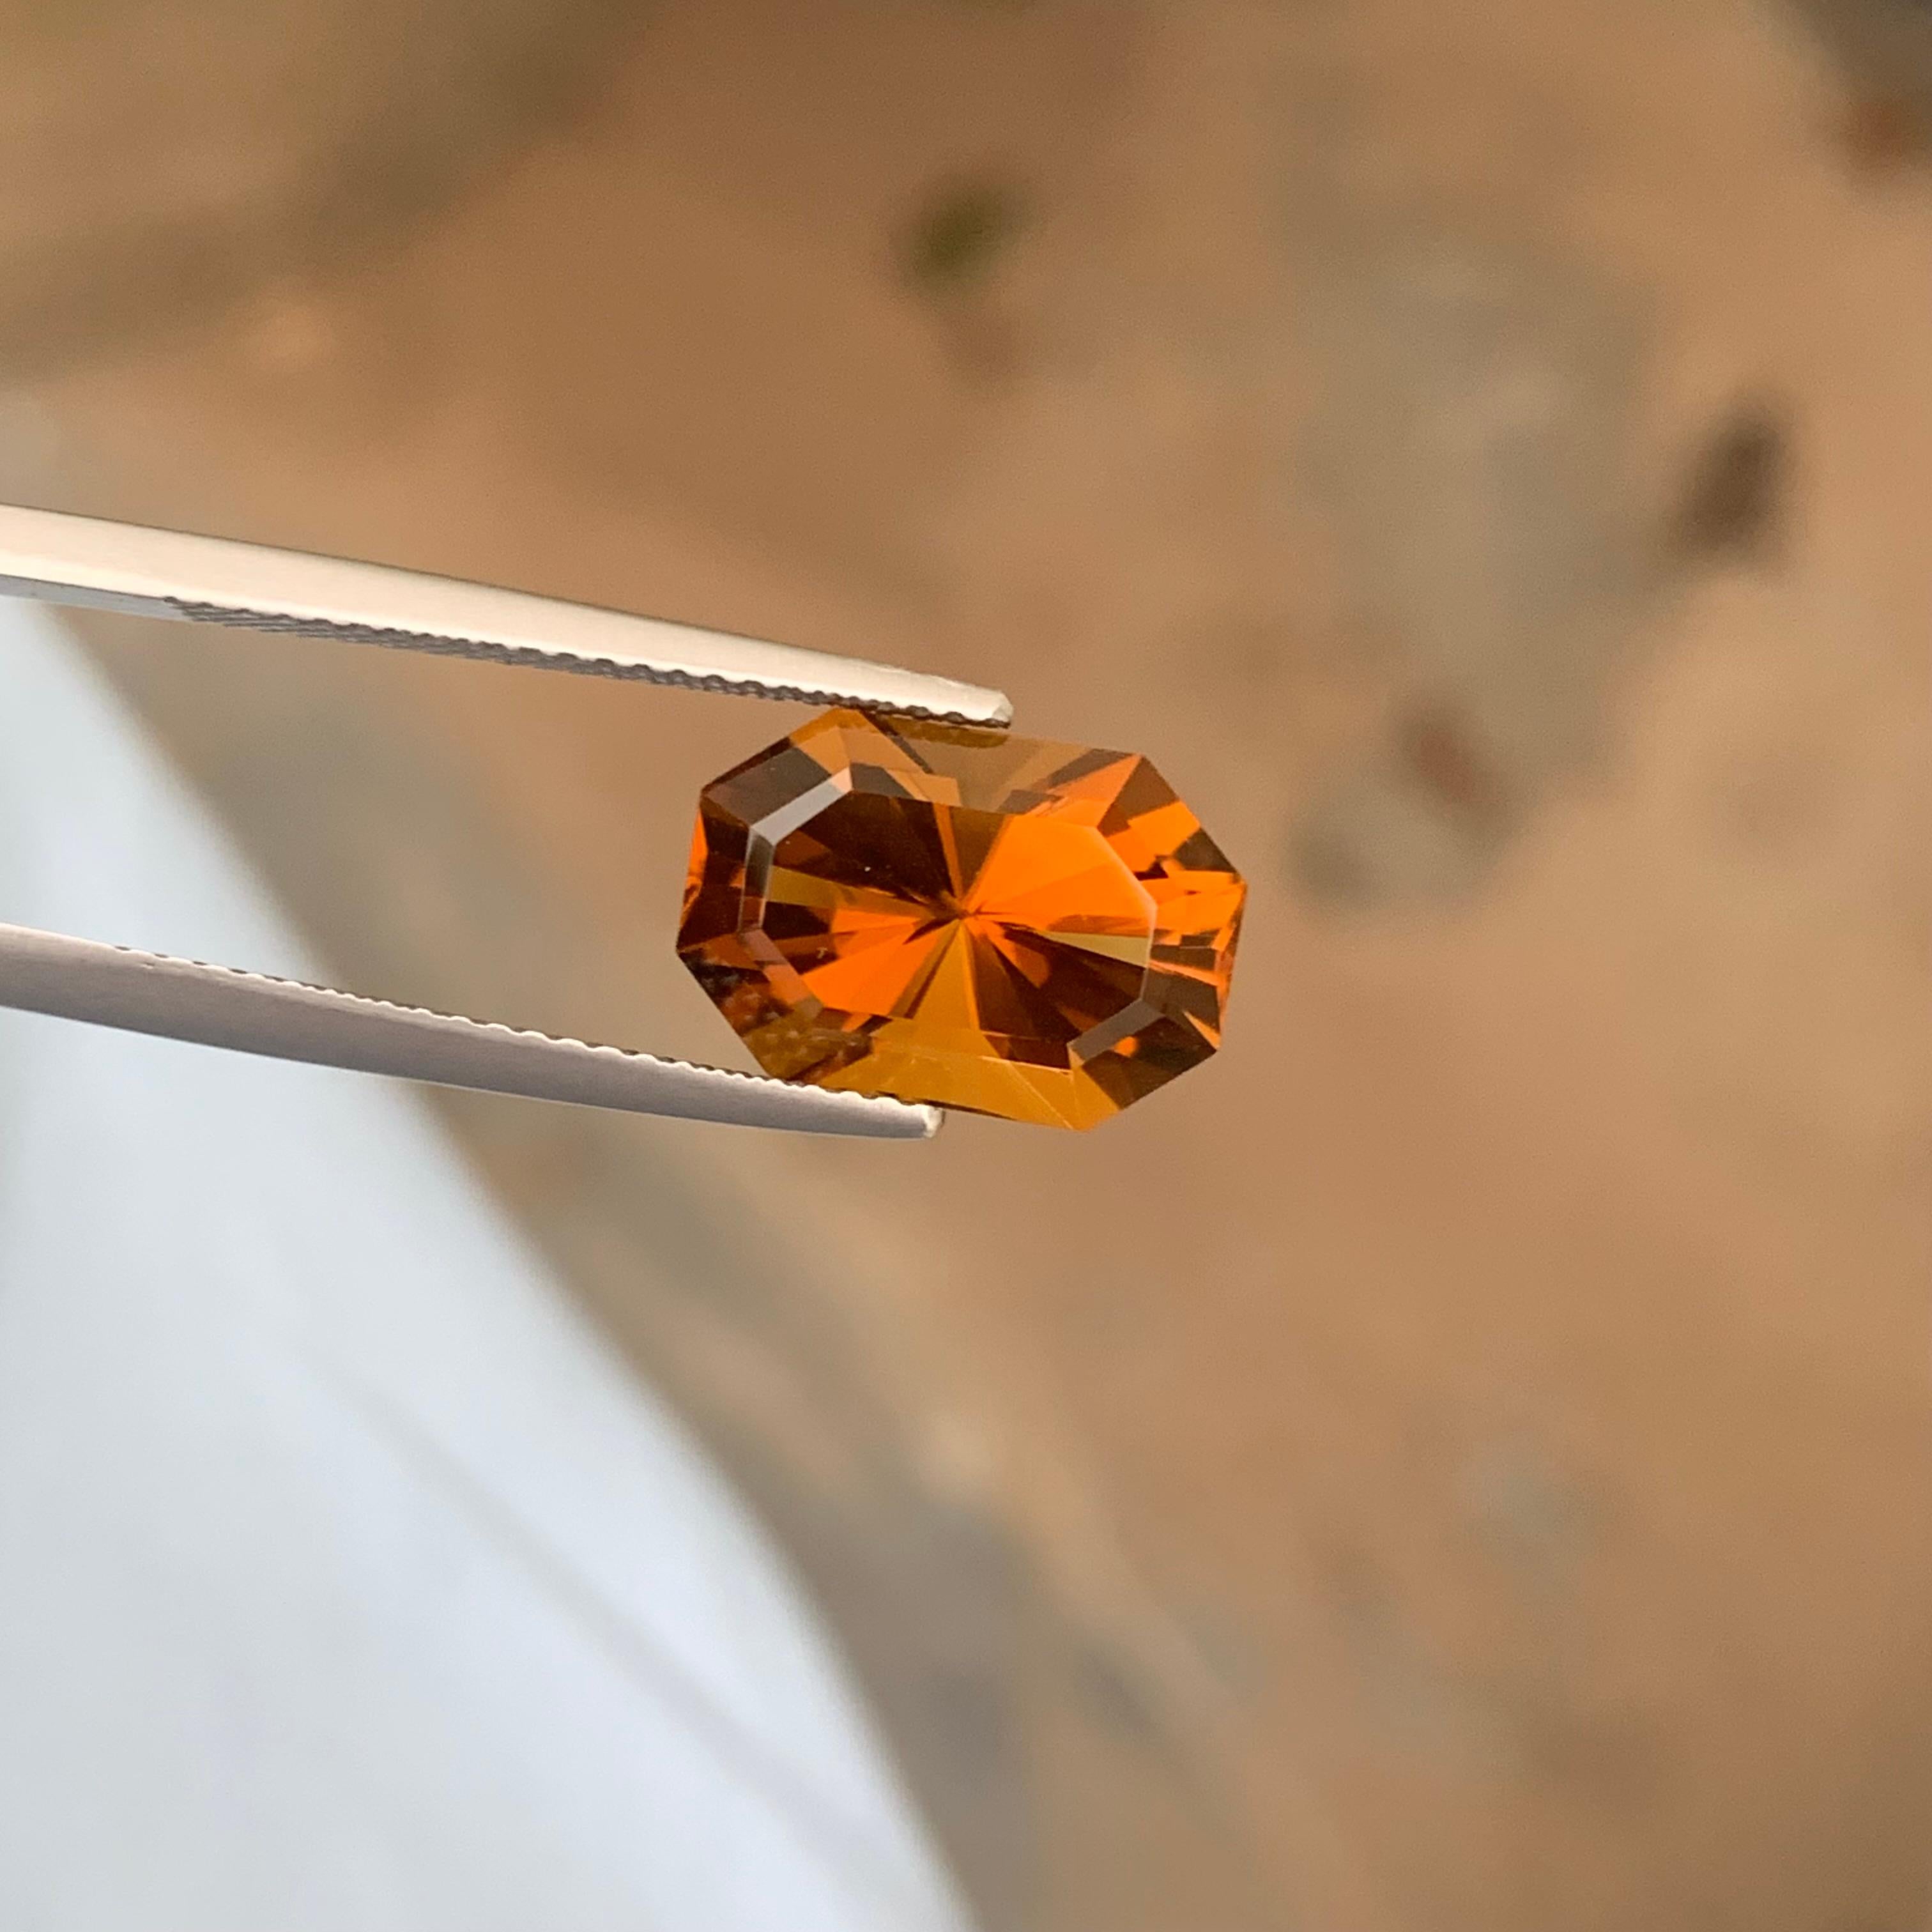 Gorgeous Loose 5.0 Carat Fancy Cut Brown Citrine Gemstone from Brazil For Sale 5